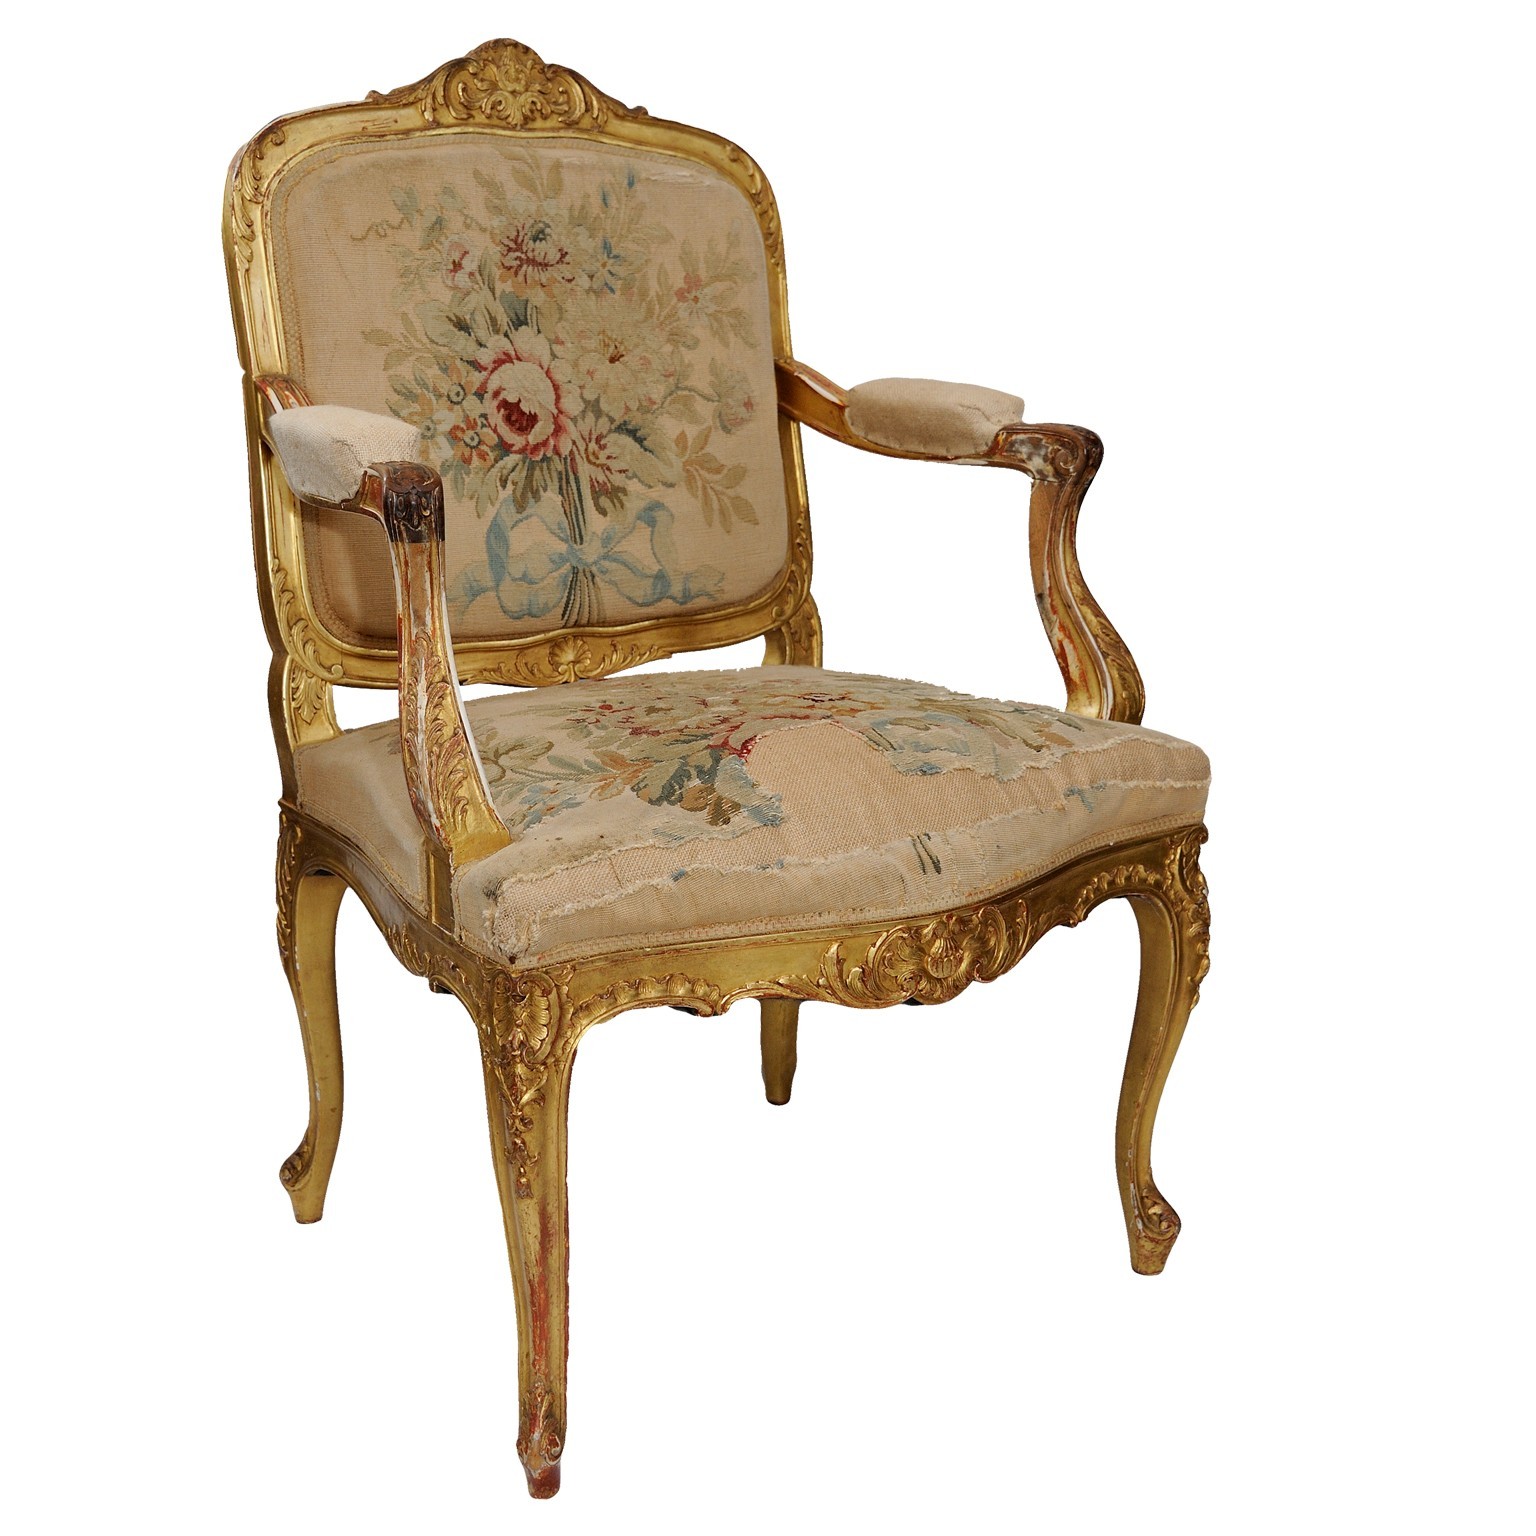 Original French Louis XV Gold Gilt Arm Chair — The Art of Antiquing